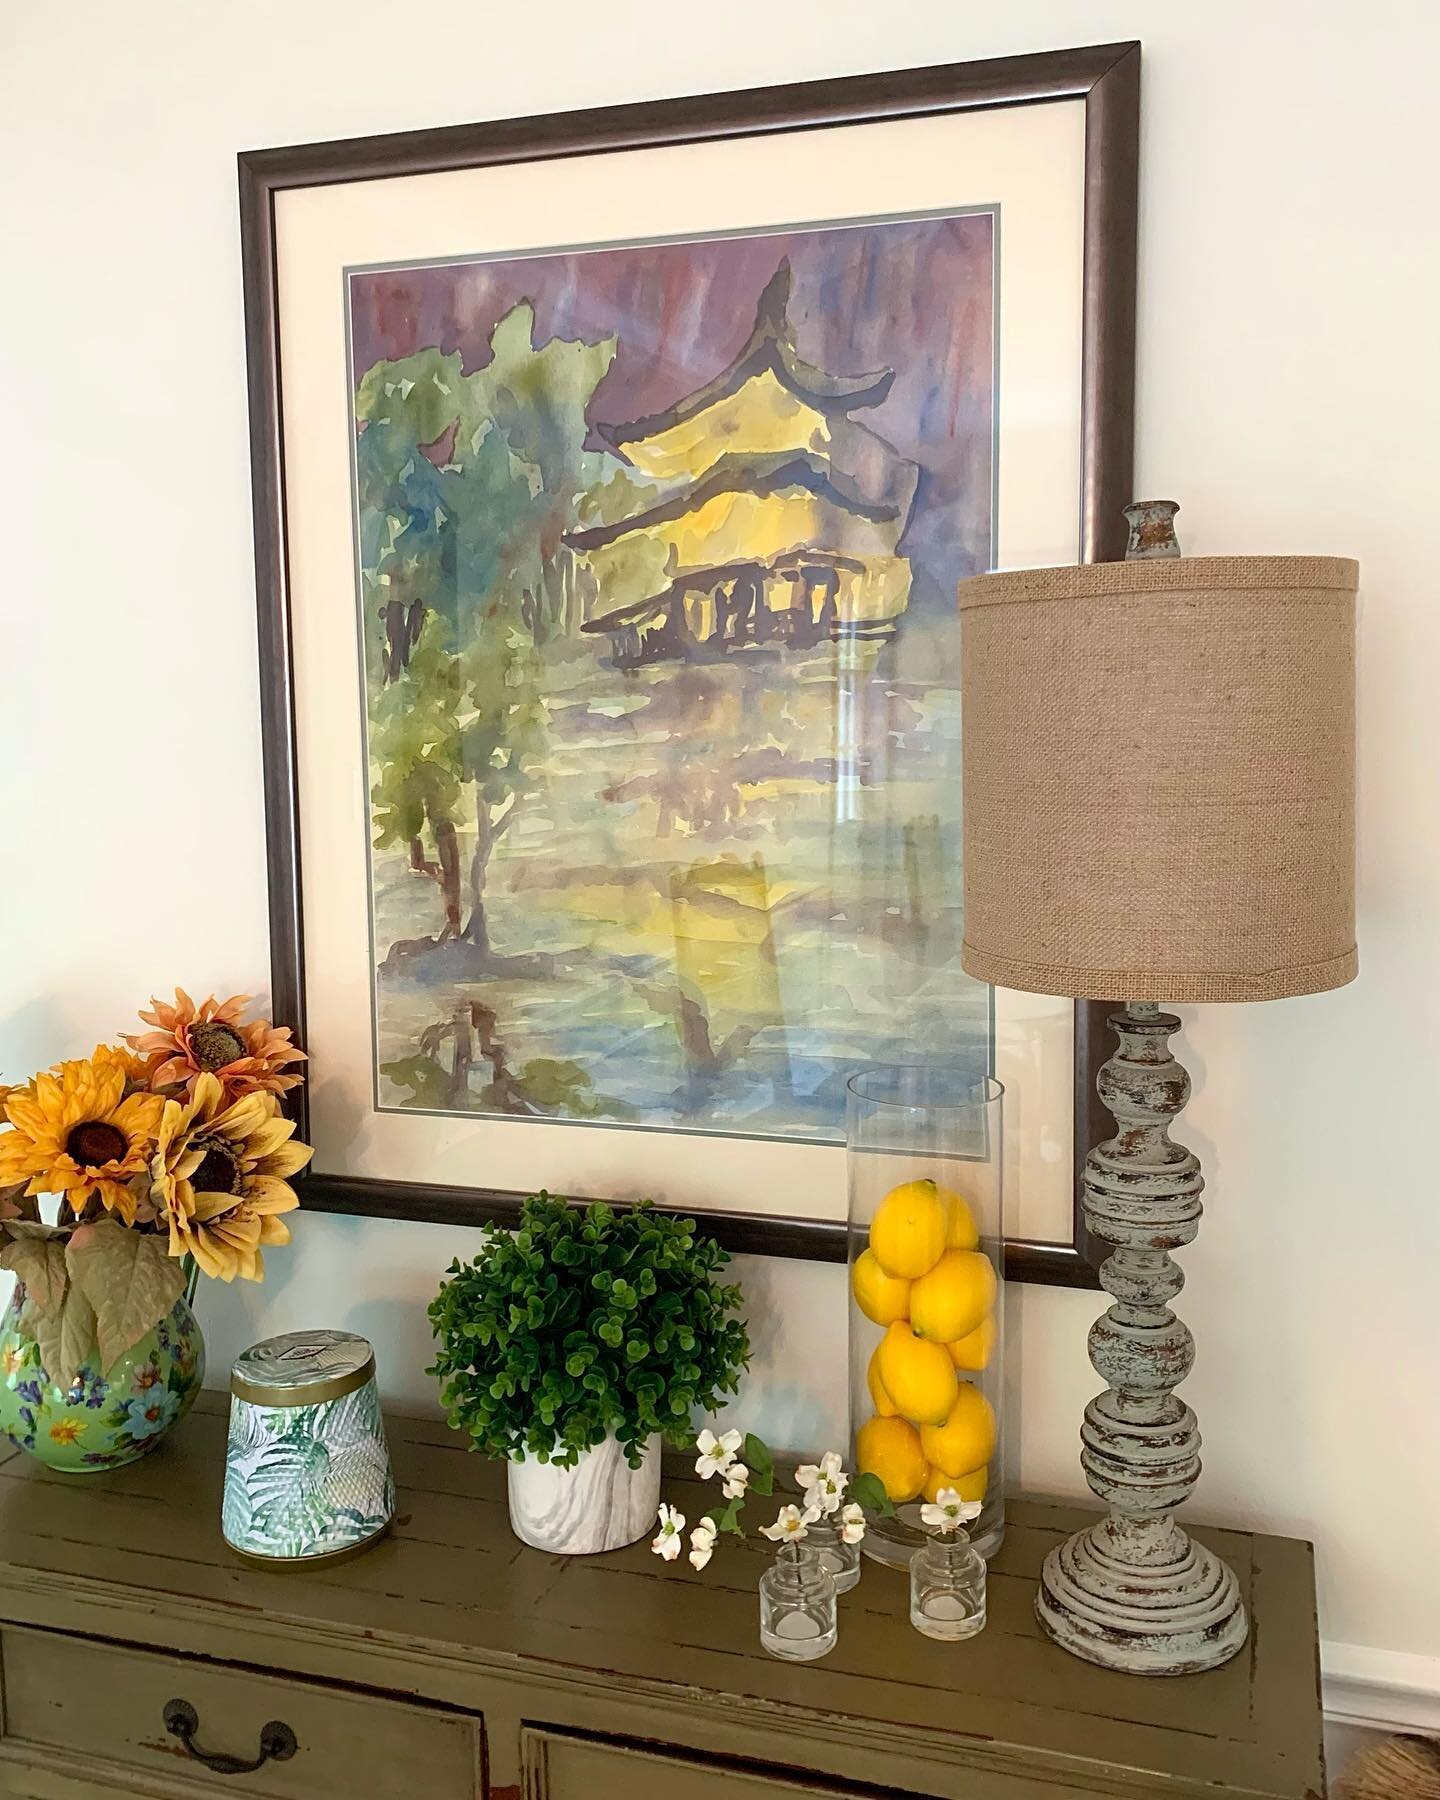 Sooo fun!!!! I visited friends house today &amp; she showed me this watercolor painting I did in college that she bought from me so long ago. Crazy! 

To see a painting from 20 yrs ago pop up in my life again is like an old friend! Memories flooded t